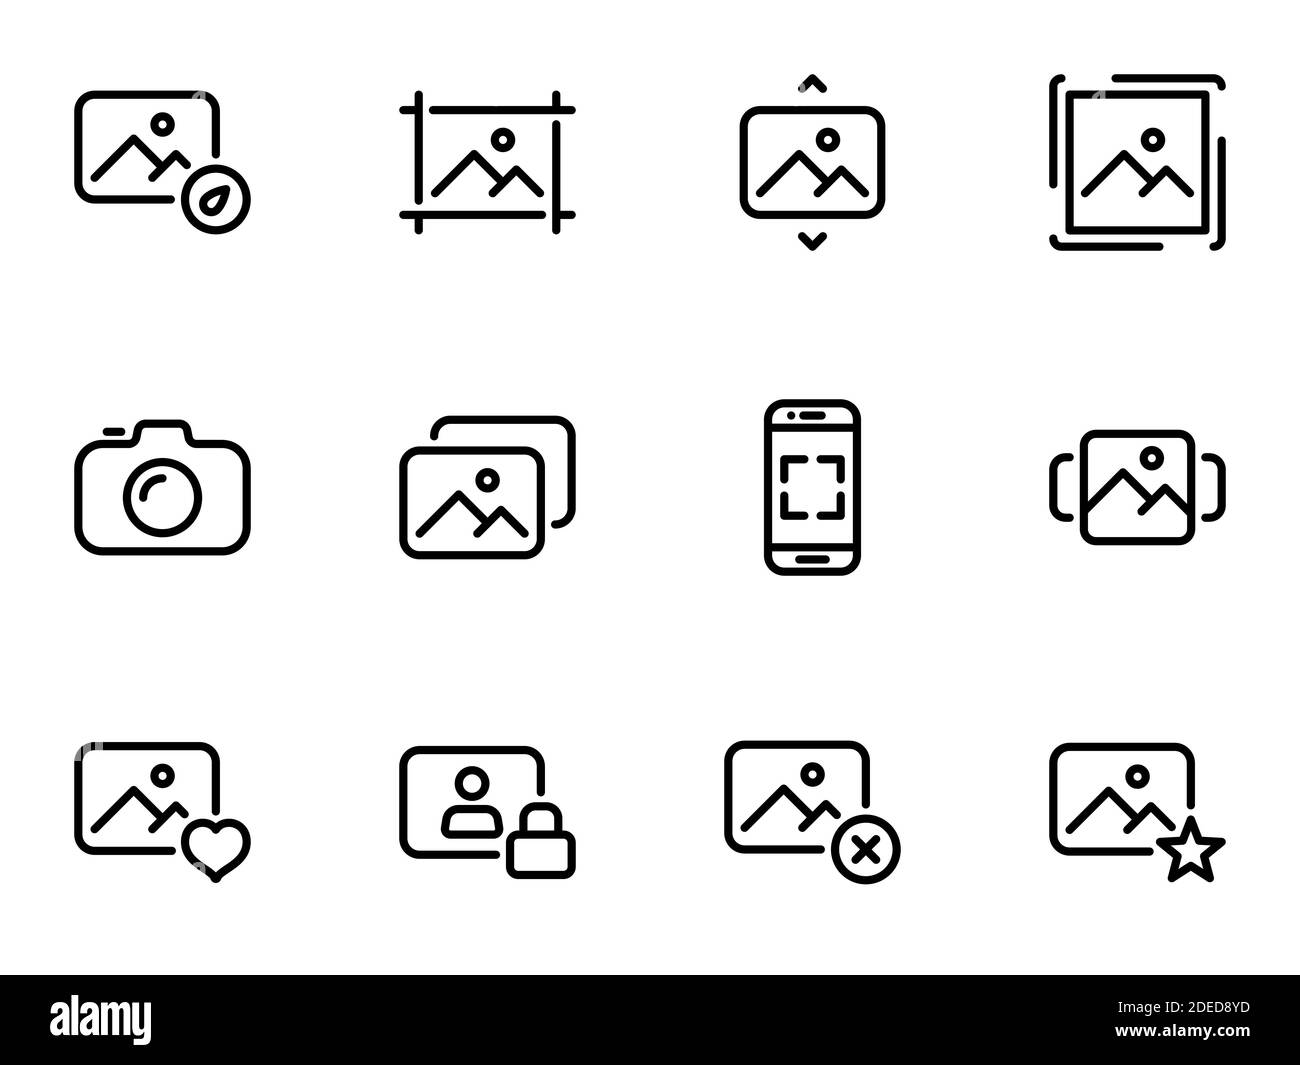 Set of black vector icons, isolated on white background, on theme Photography and social interaction. Restricting access to private data Stock Vector